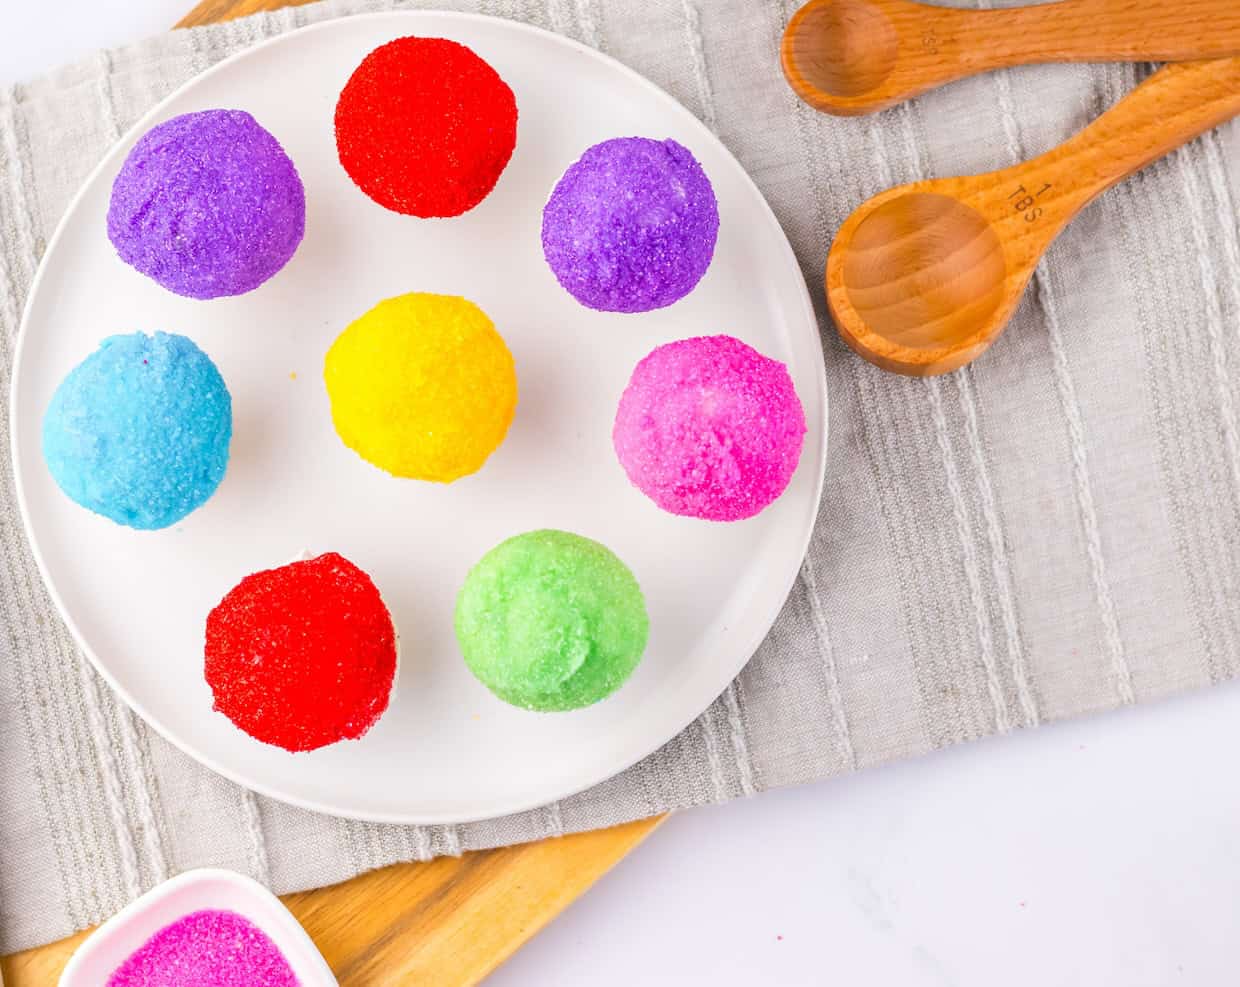 A white plate with nine round, colorful balls of sugar-coated dough on a gray striped cloth; two wooden scoops lie nearby.